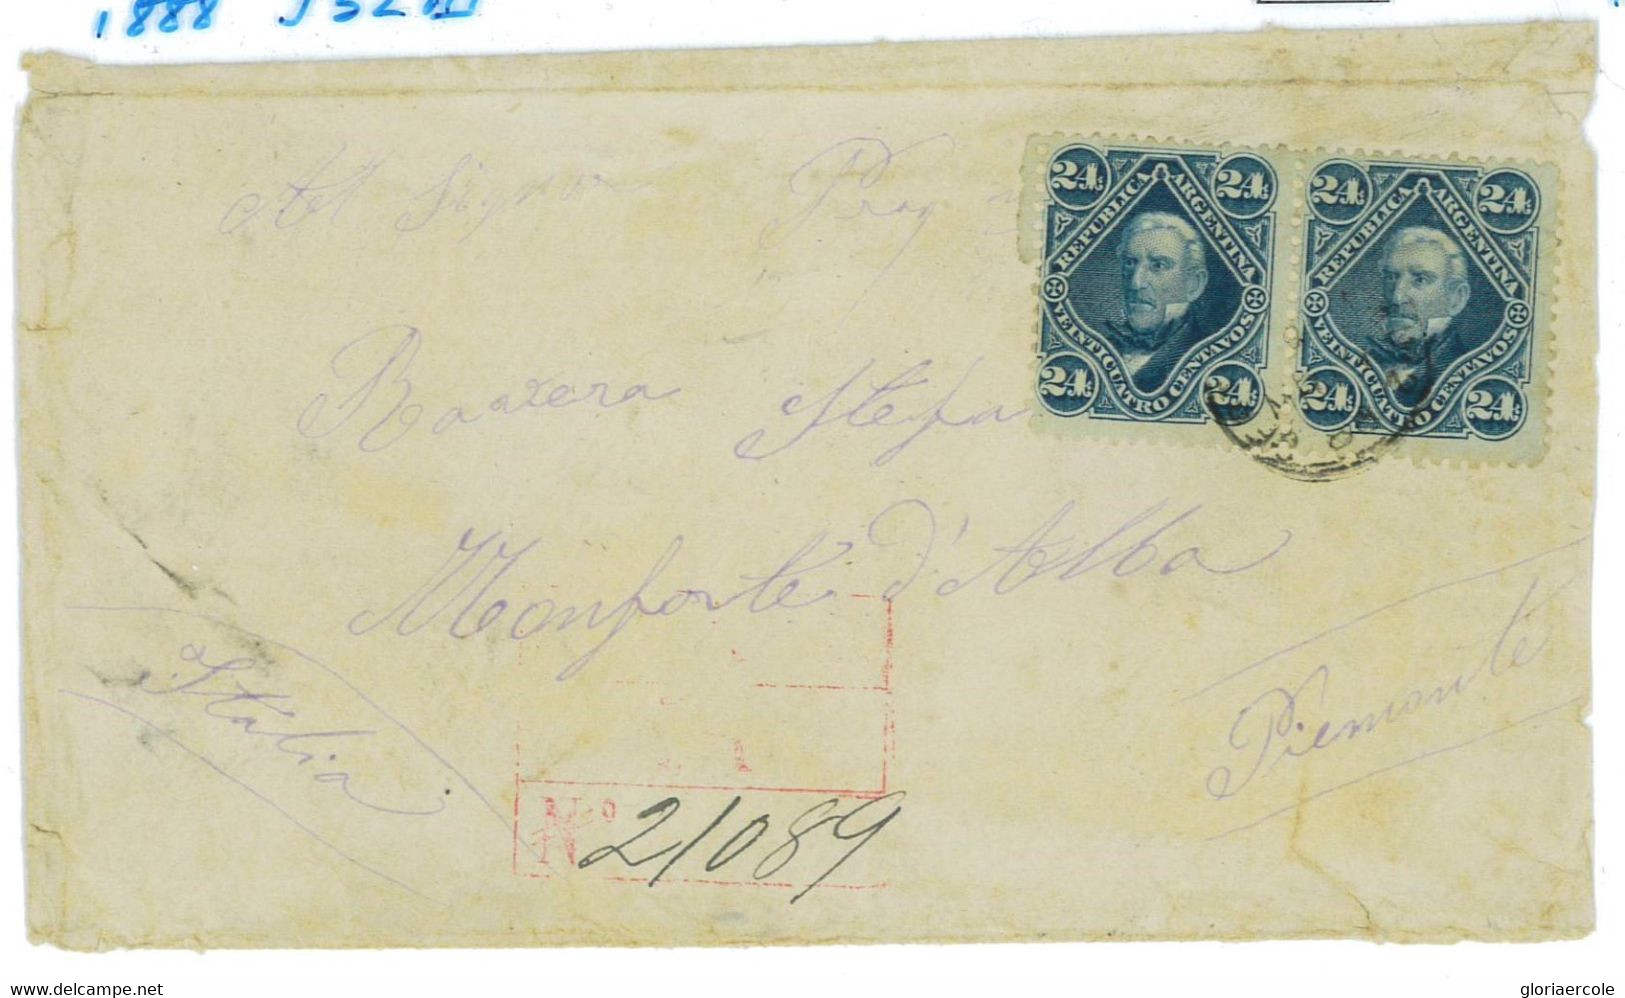 P0253 - ARGENTINA - POSTAL HISTORY - Jalil # 52 Pair - REGISTERED COVER  To ITALY  1888 - Briefe U. Dokumente